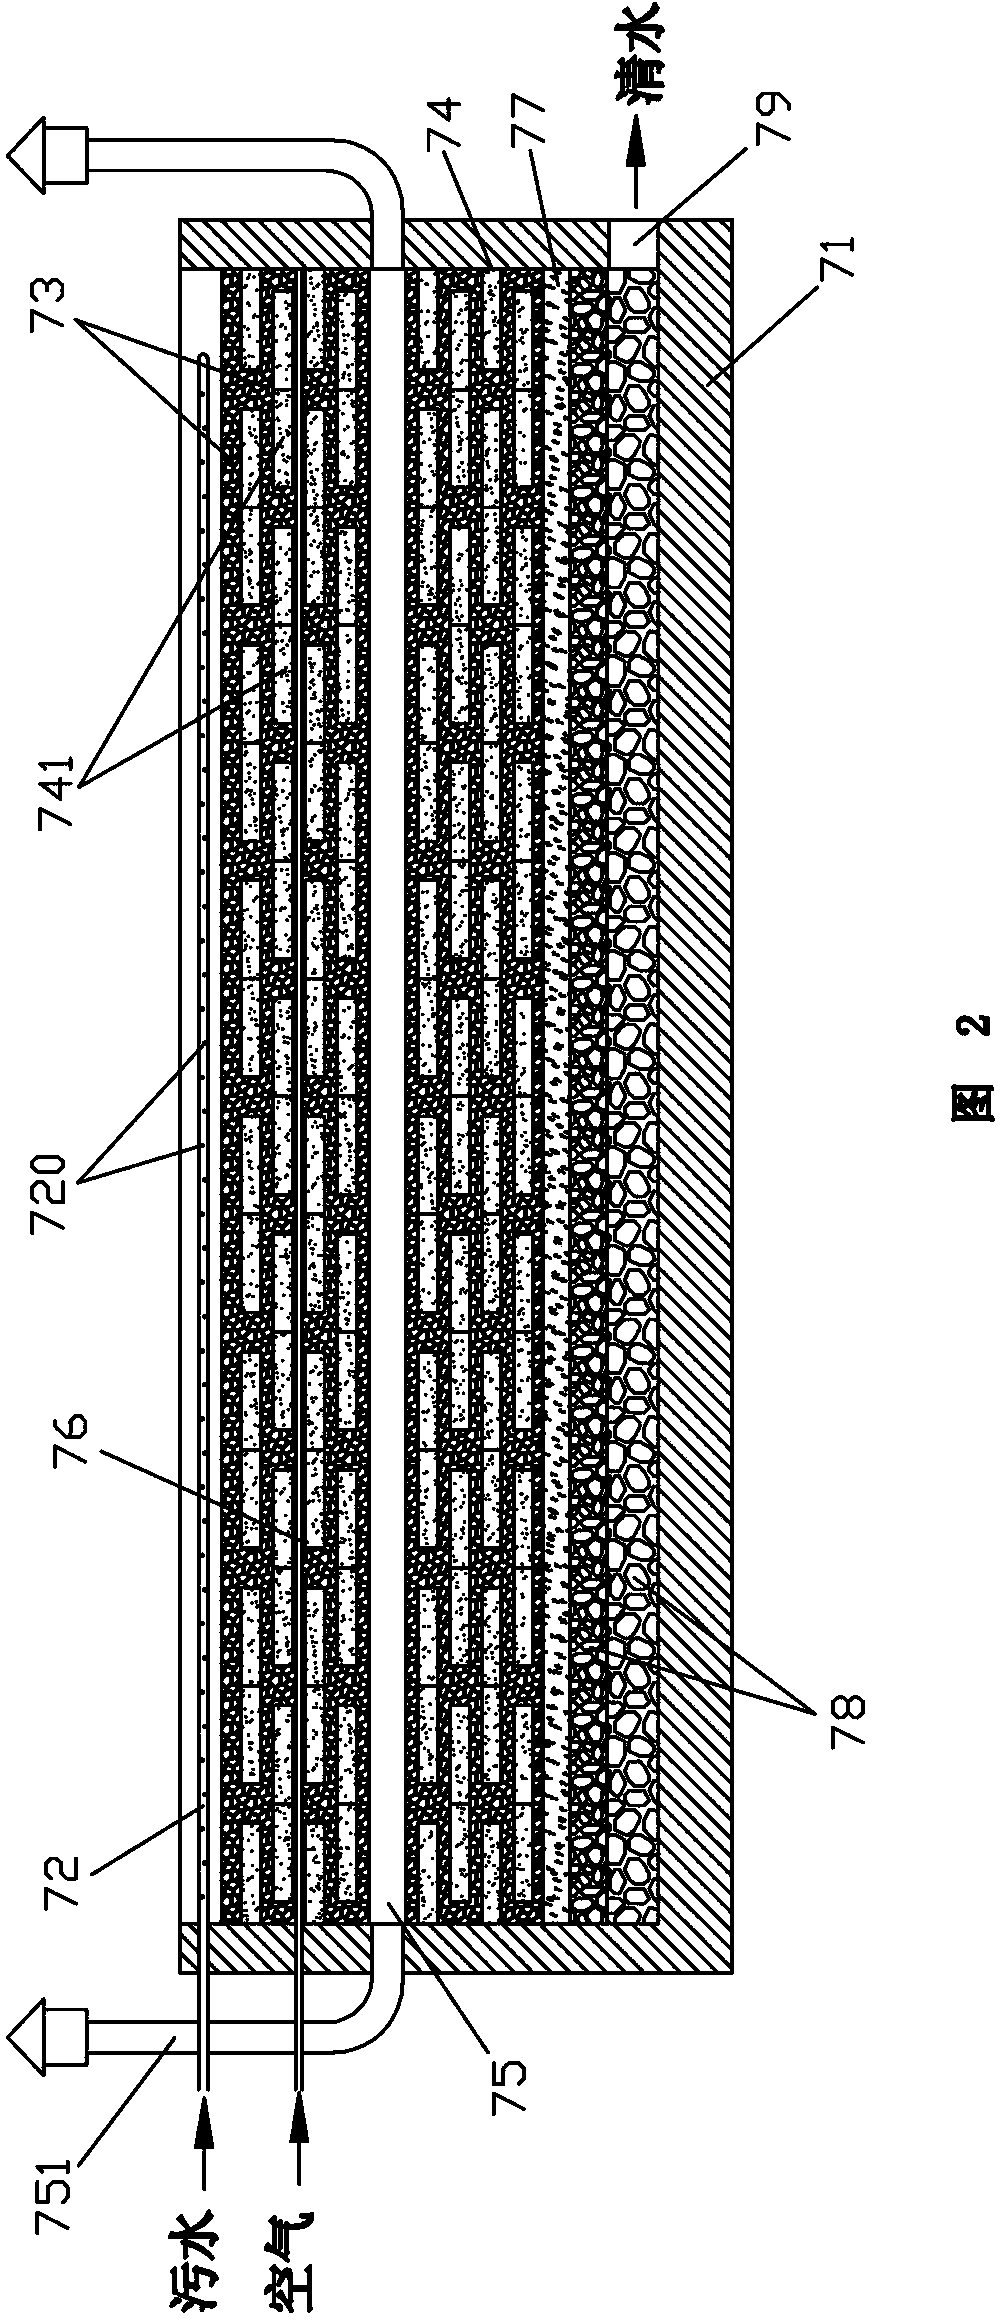 Dispersive sewage multilayer soil ecological treatment device and method